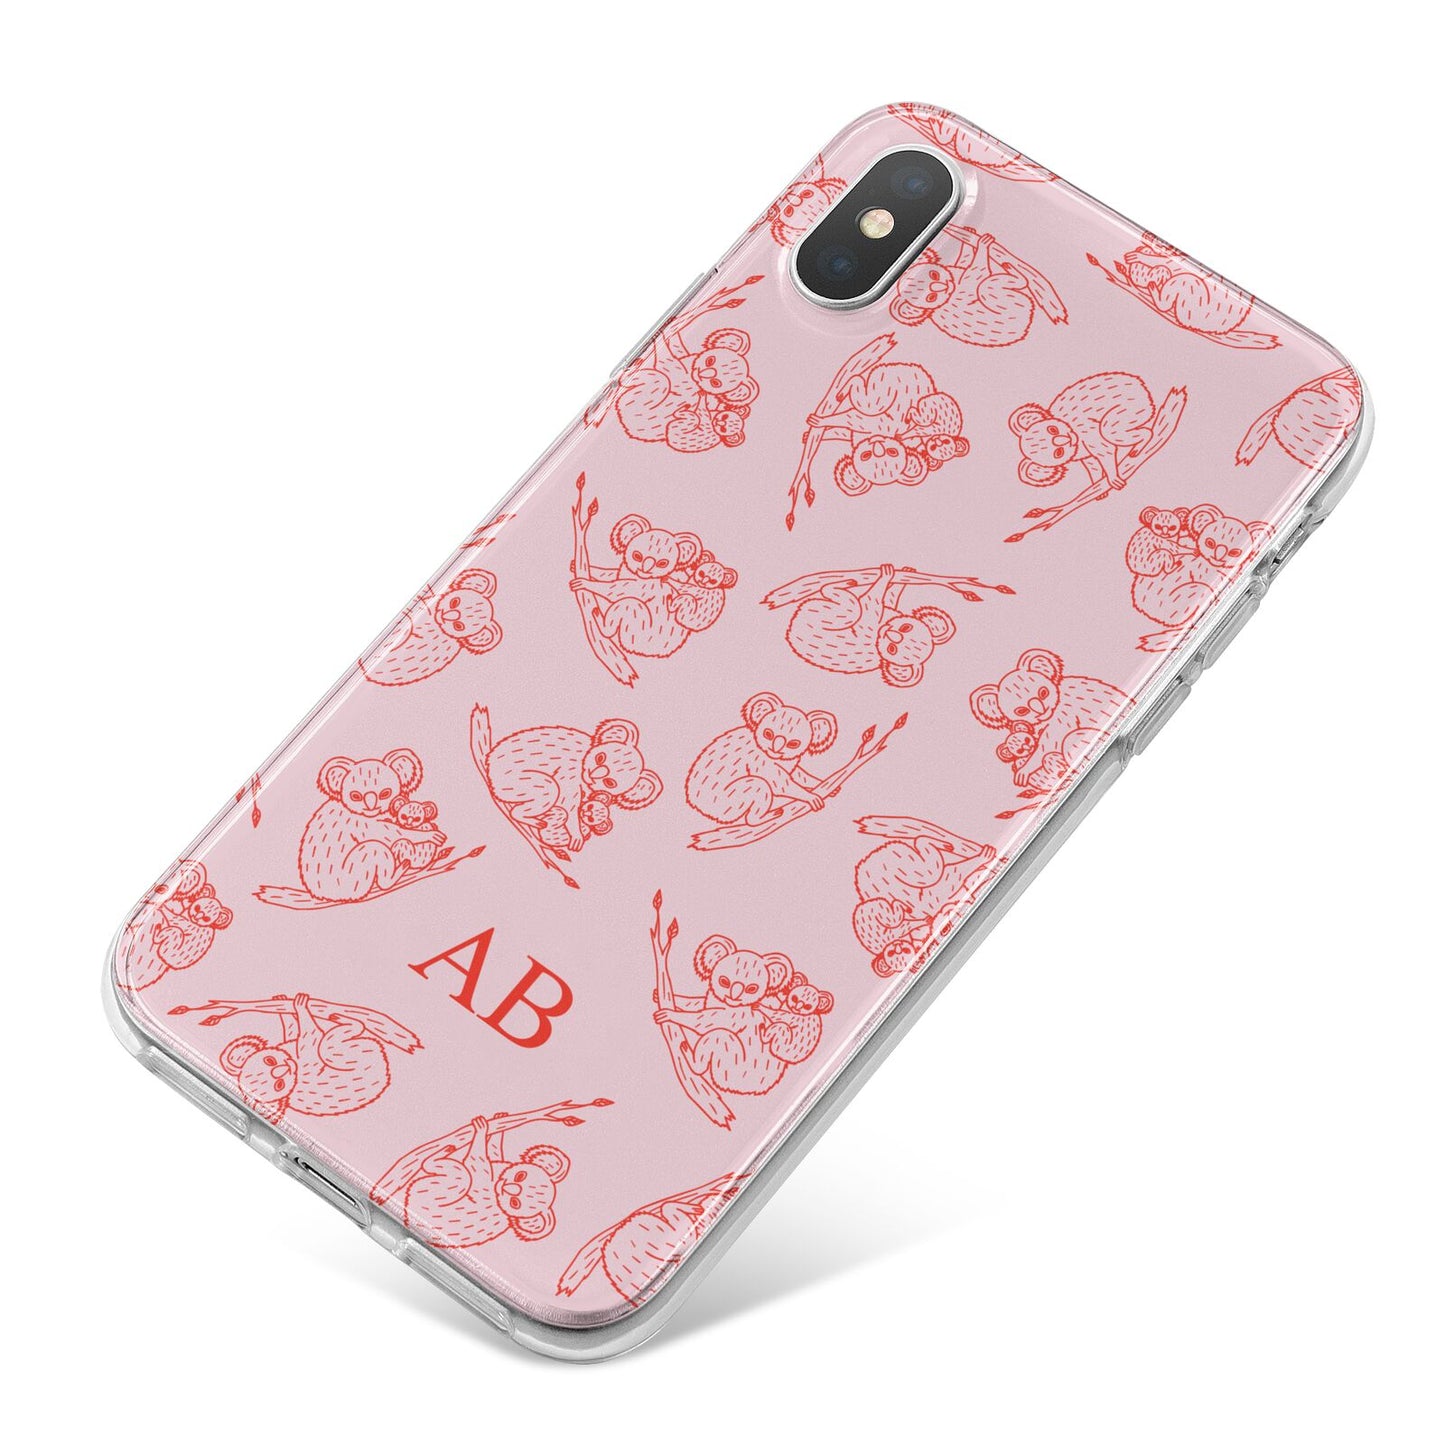 Personalised Koala iPhone X Bumper Case on Silver iPhone